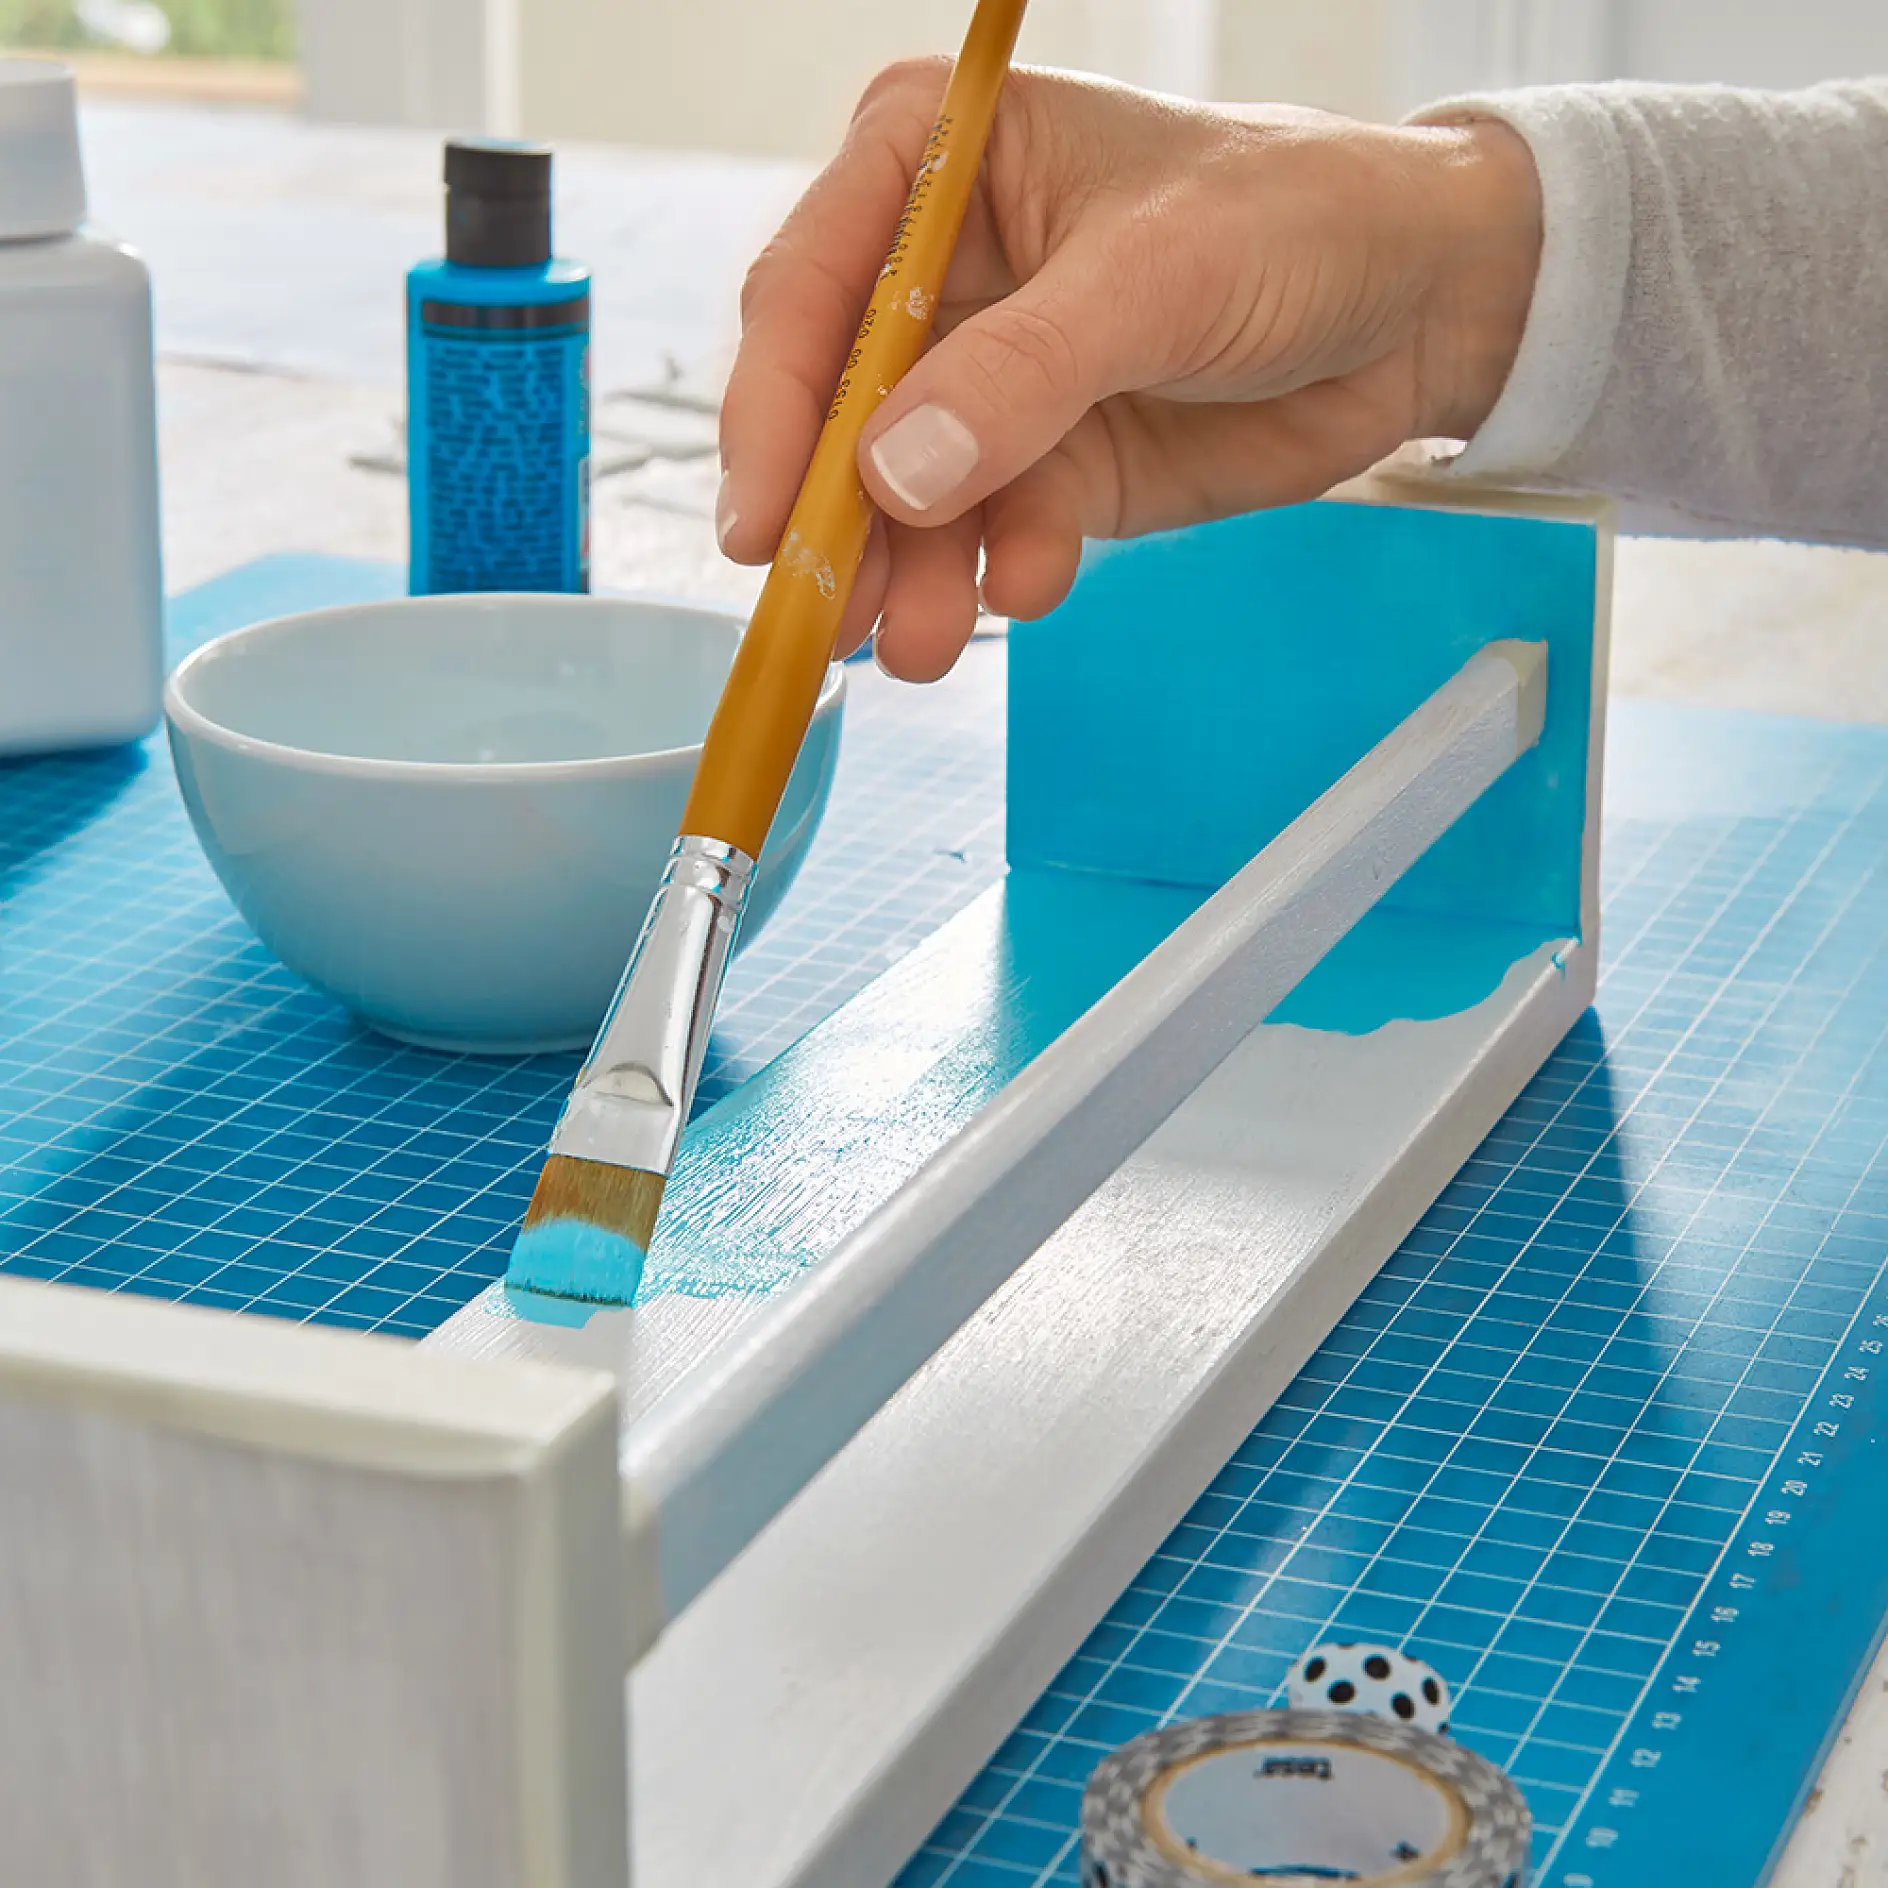 Painting the inside of the spice racks when making shelves – a great bathroom storage idea.